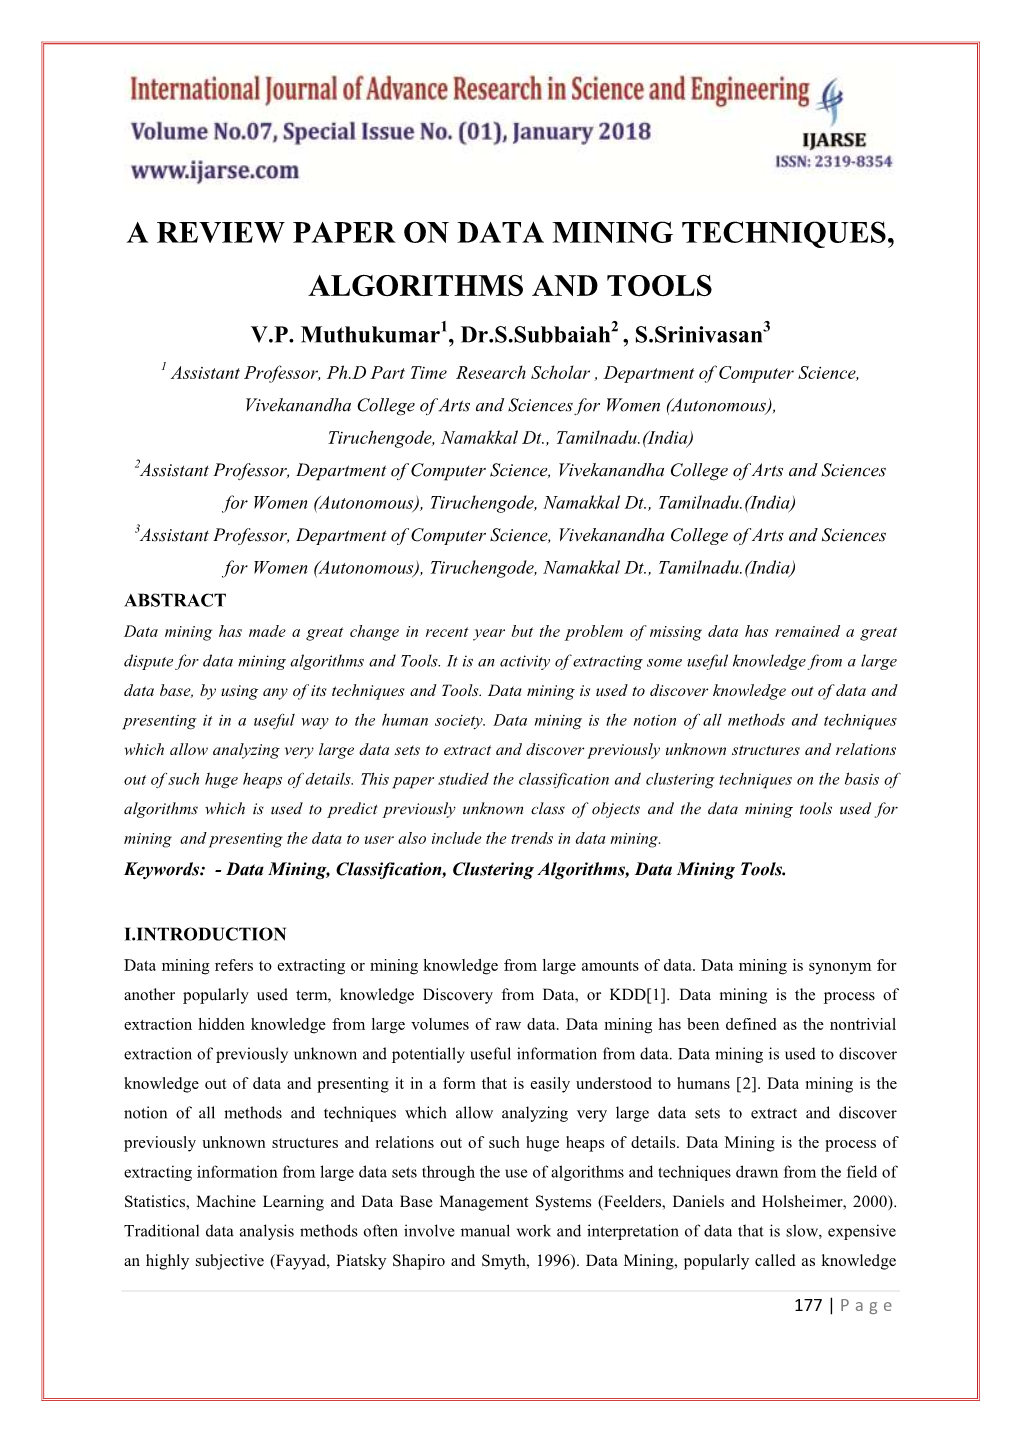 A Review Paper on Data Mining Techniques, Algorithms and Tools V.P